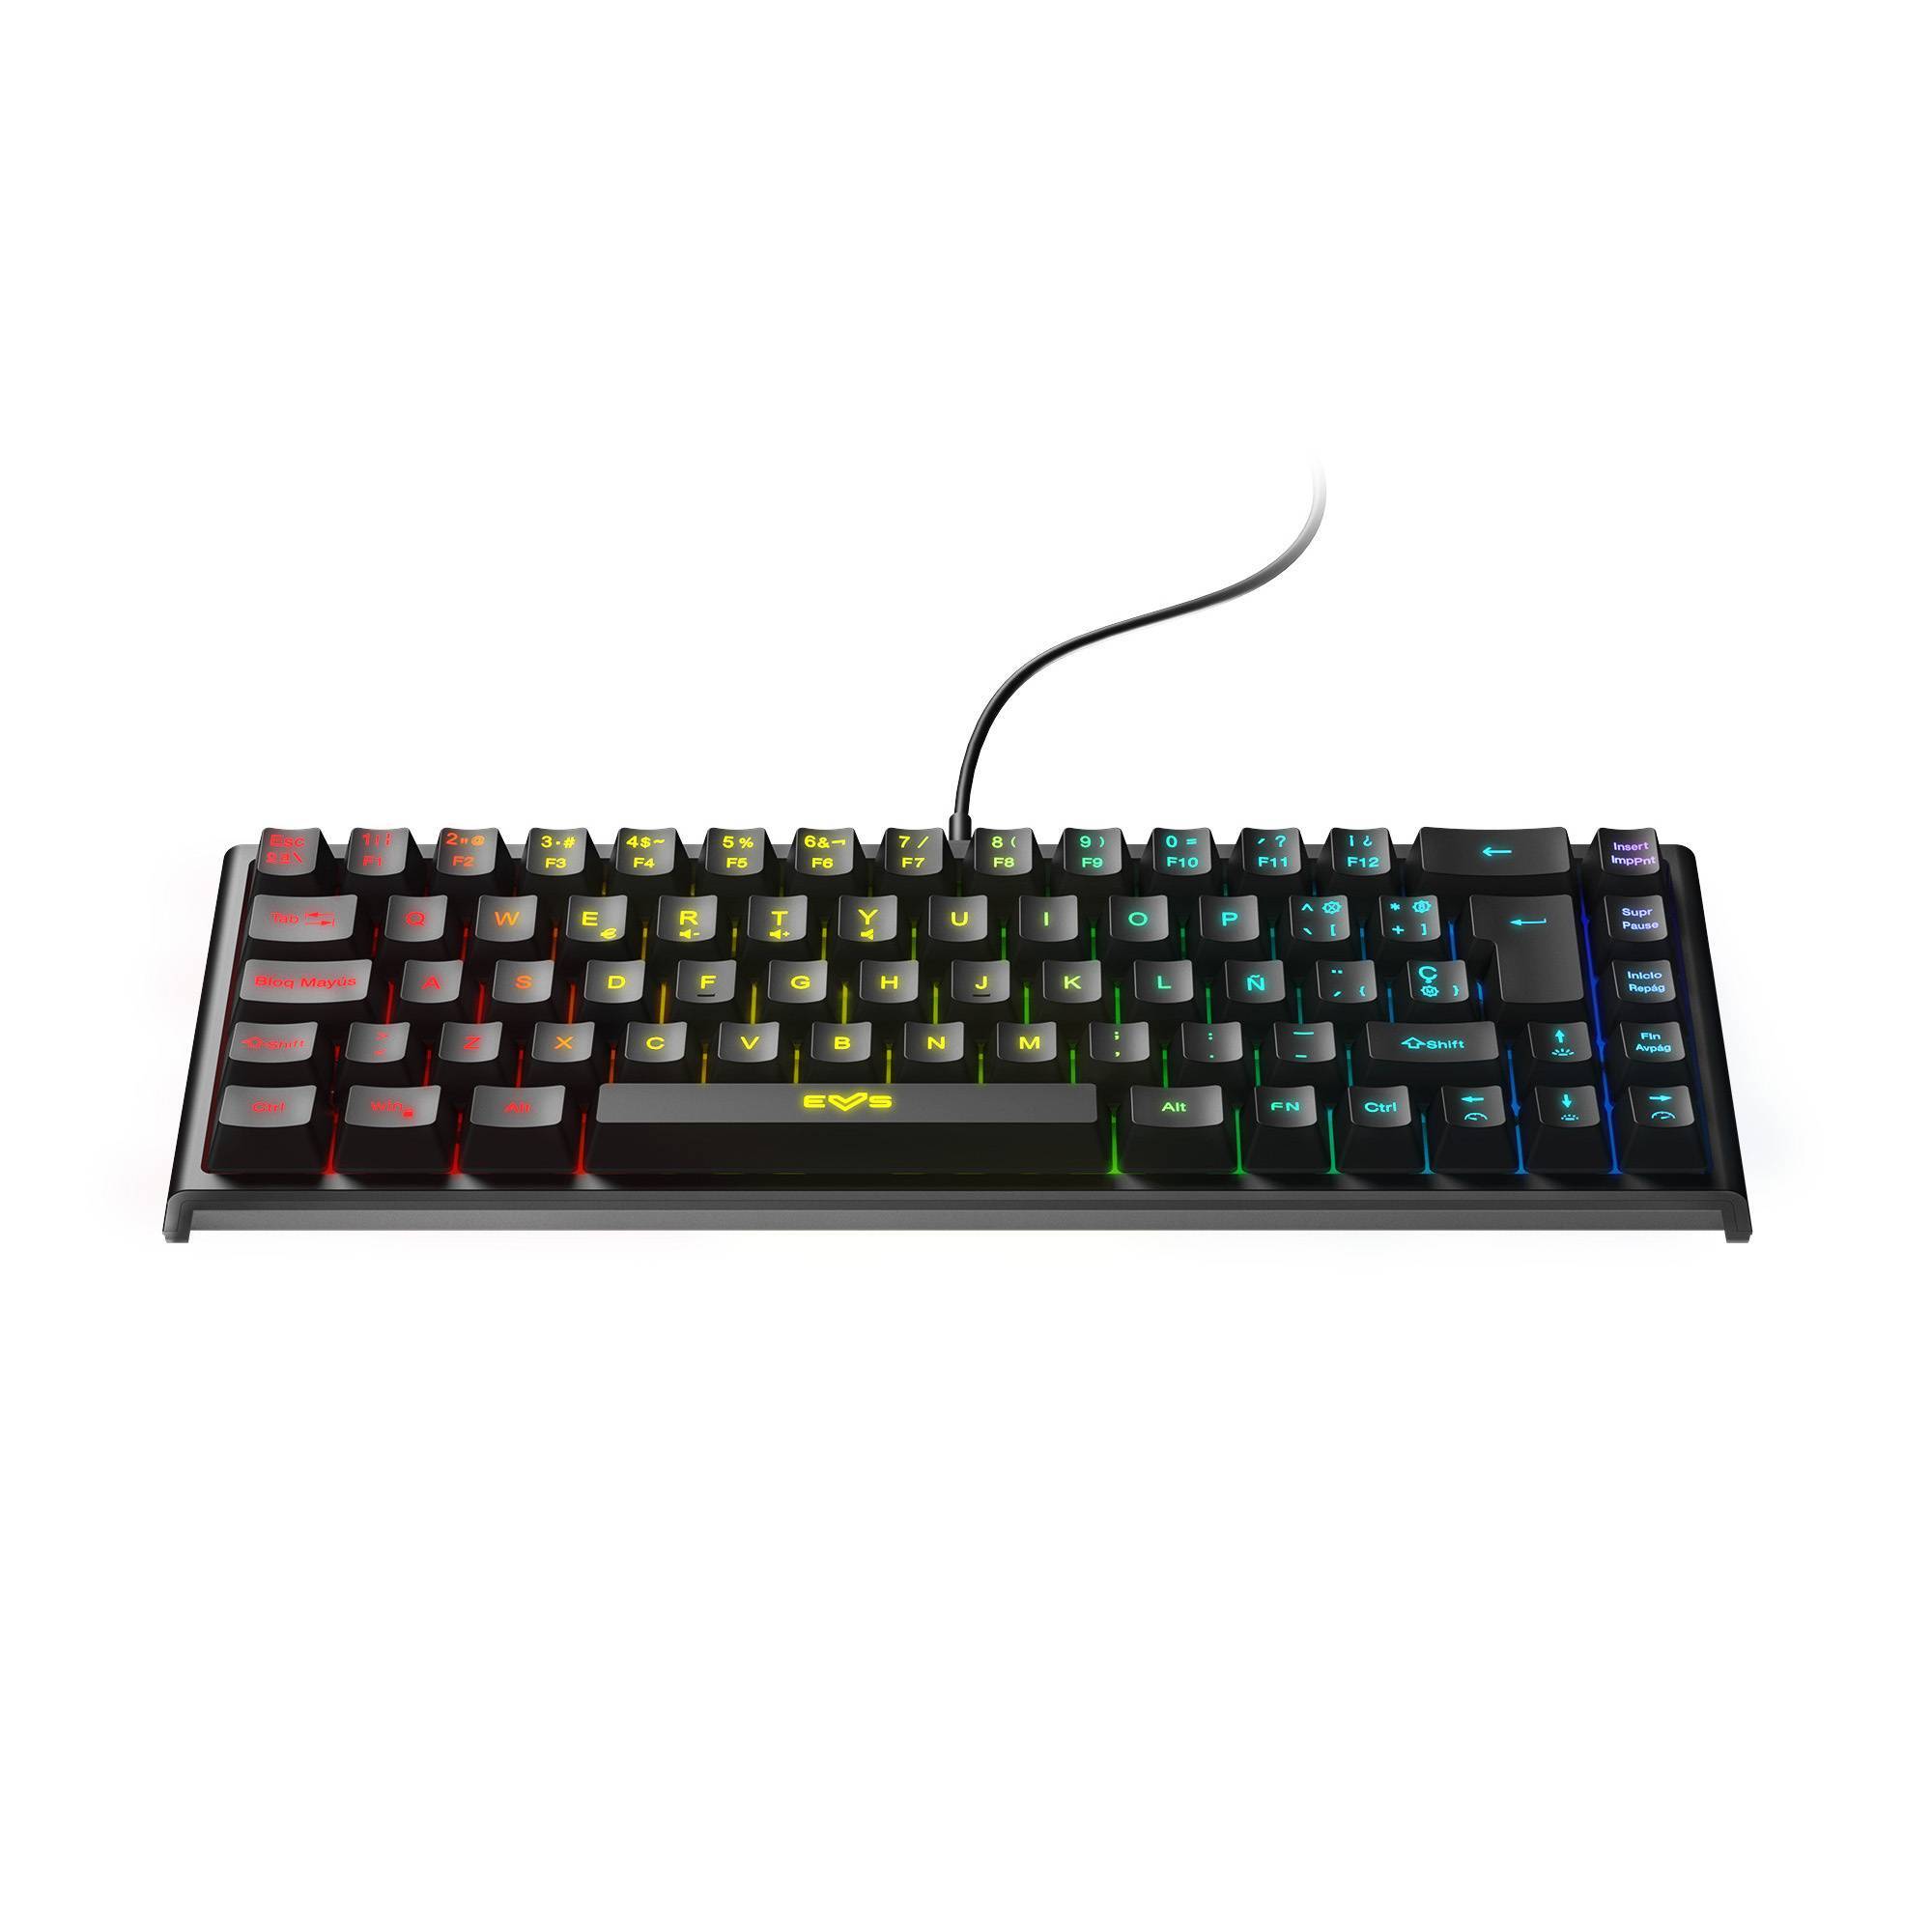 Compact membrane gaming keyboard with just 68 keys